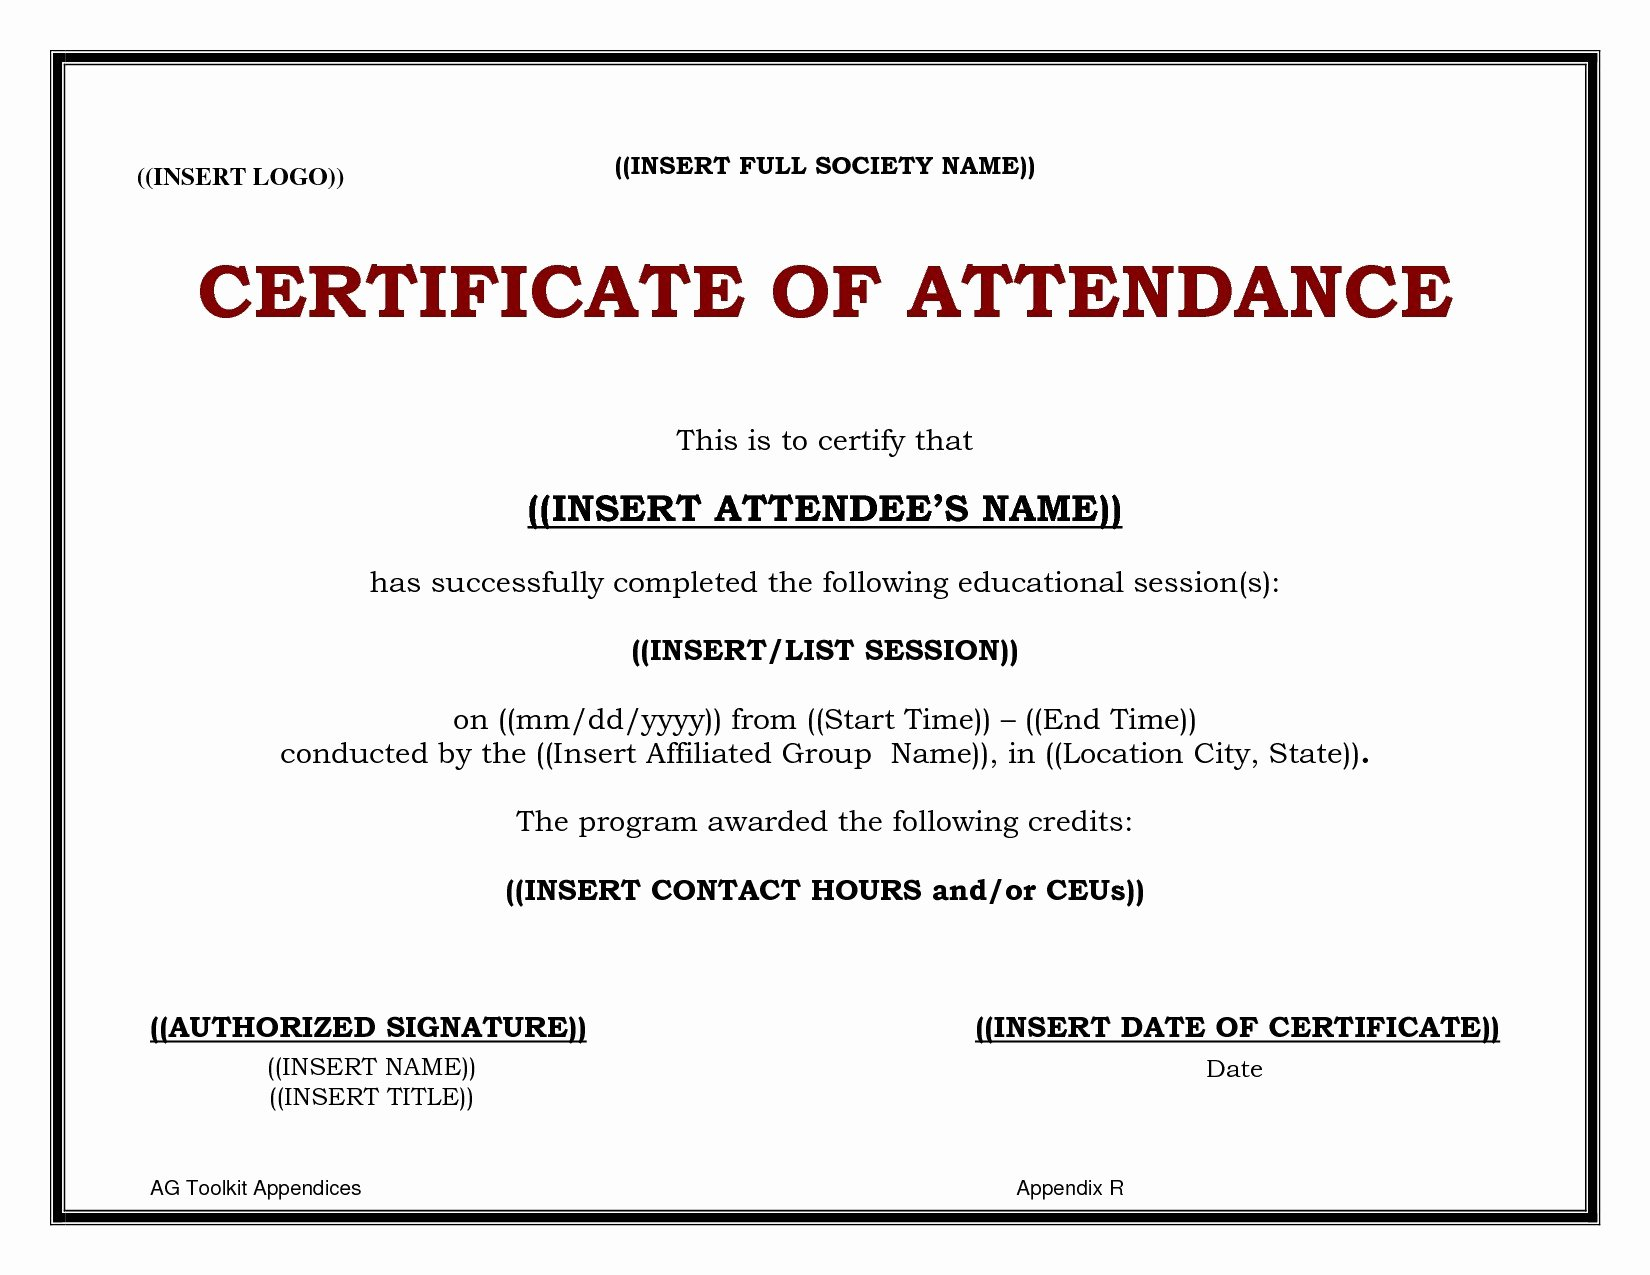 30 Ceu Certificate Of Attendance Template | Pryncepality With Regard To Conference Certificate Of Attendance Template